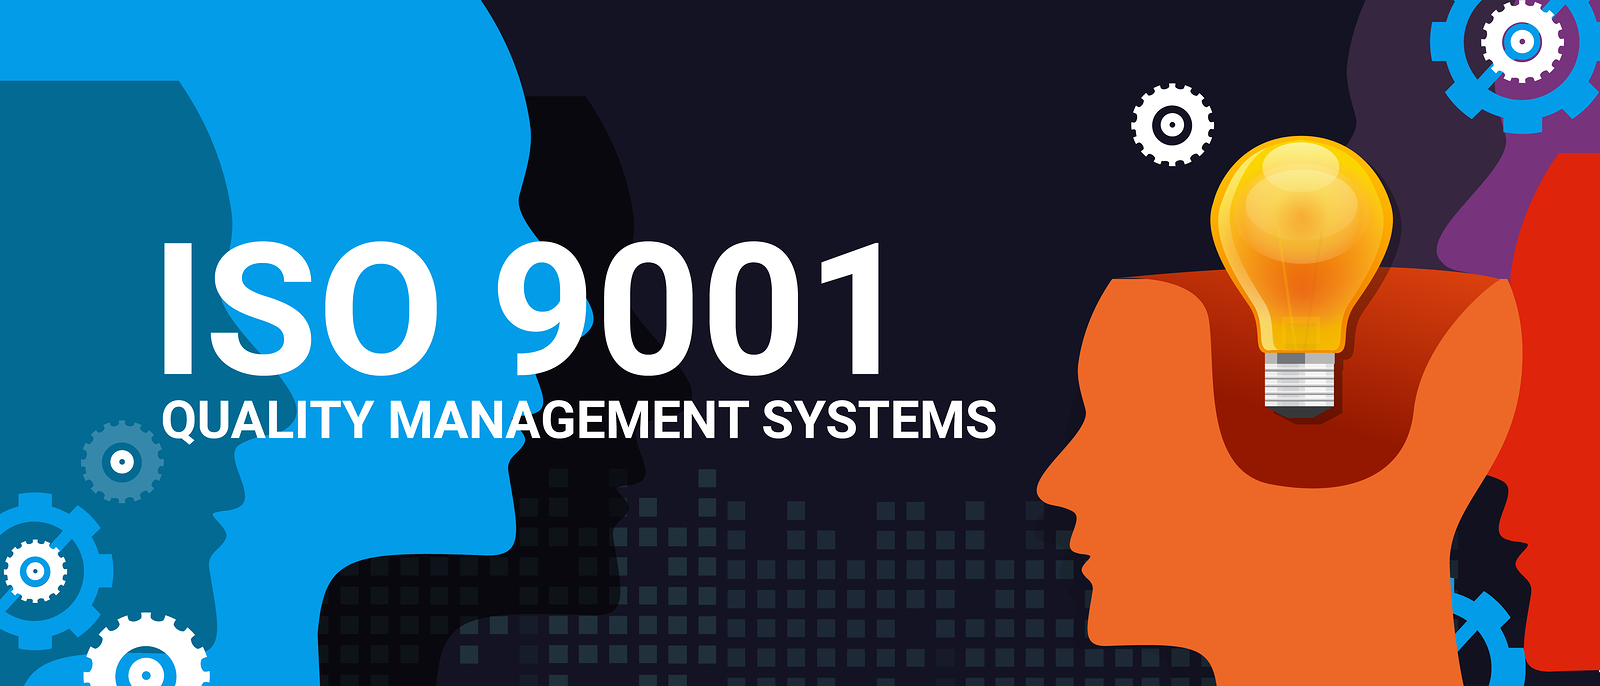 ISO 9001 quality management systems